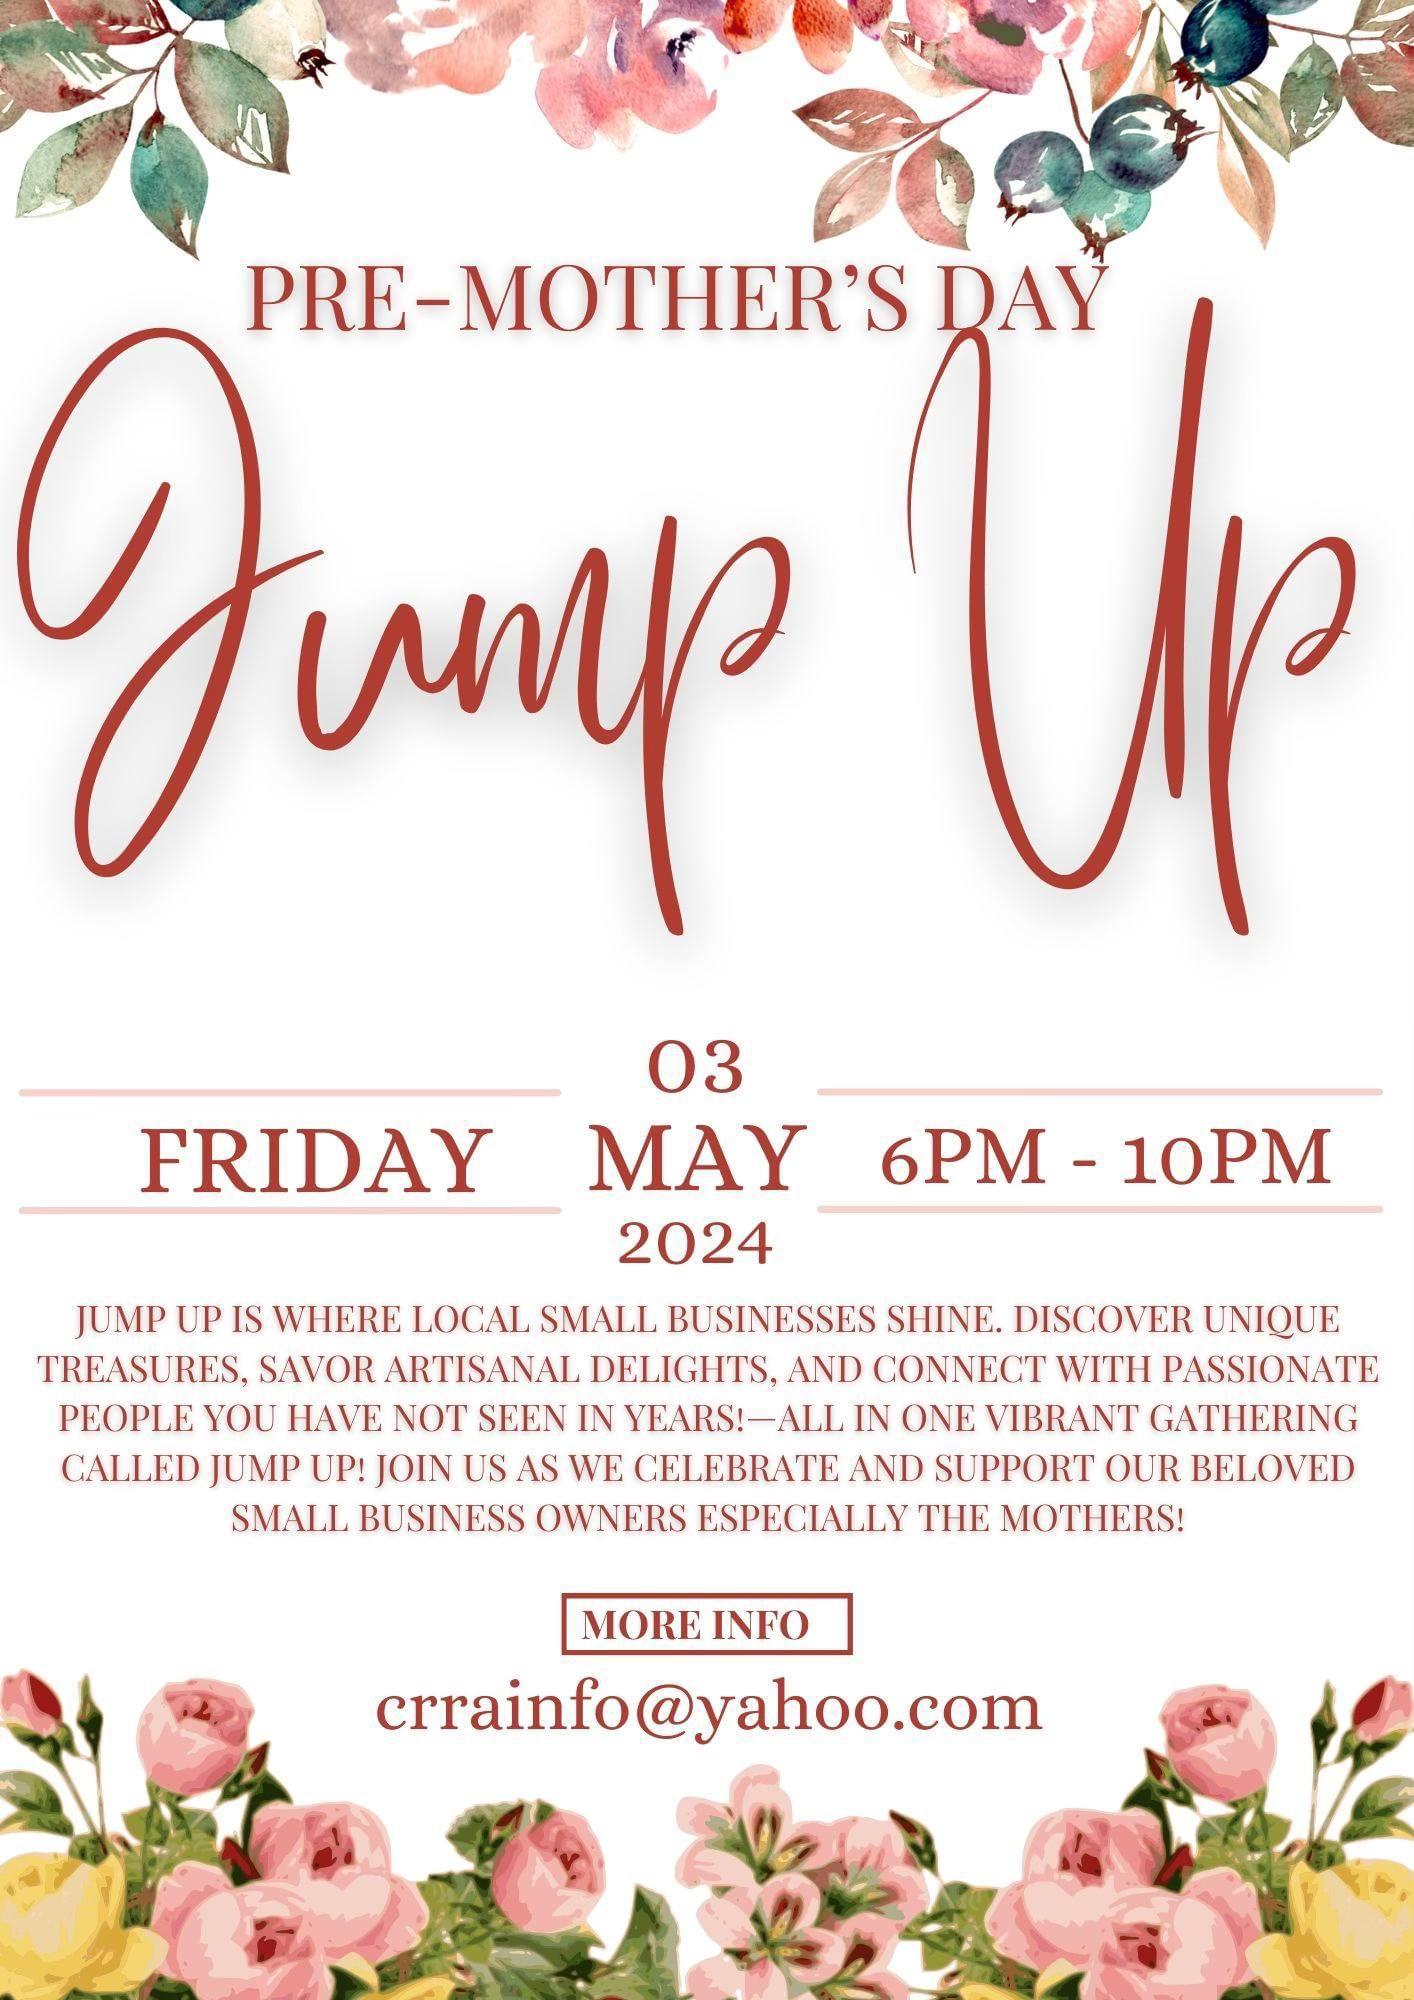 Pre-Mother's Day Jump Up